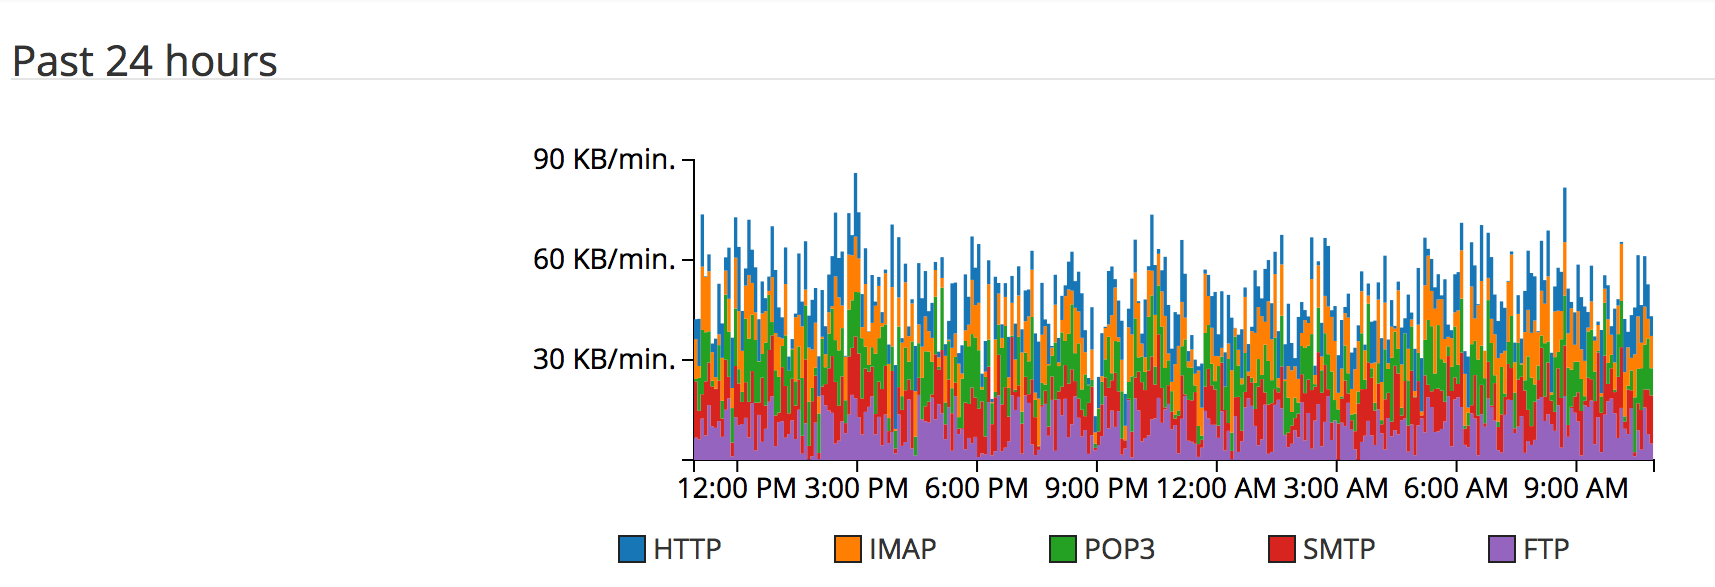 bandwidth.past24hours.png